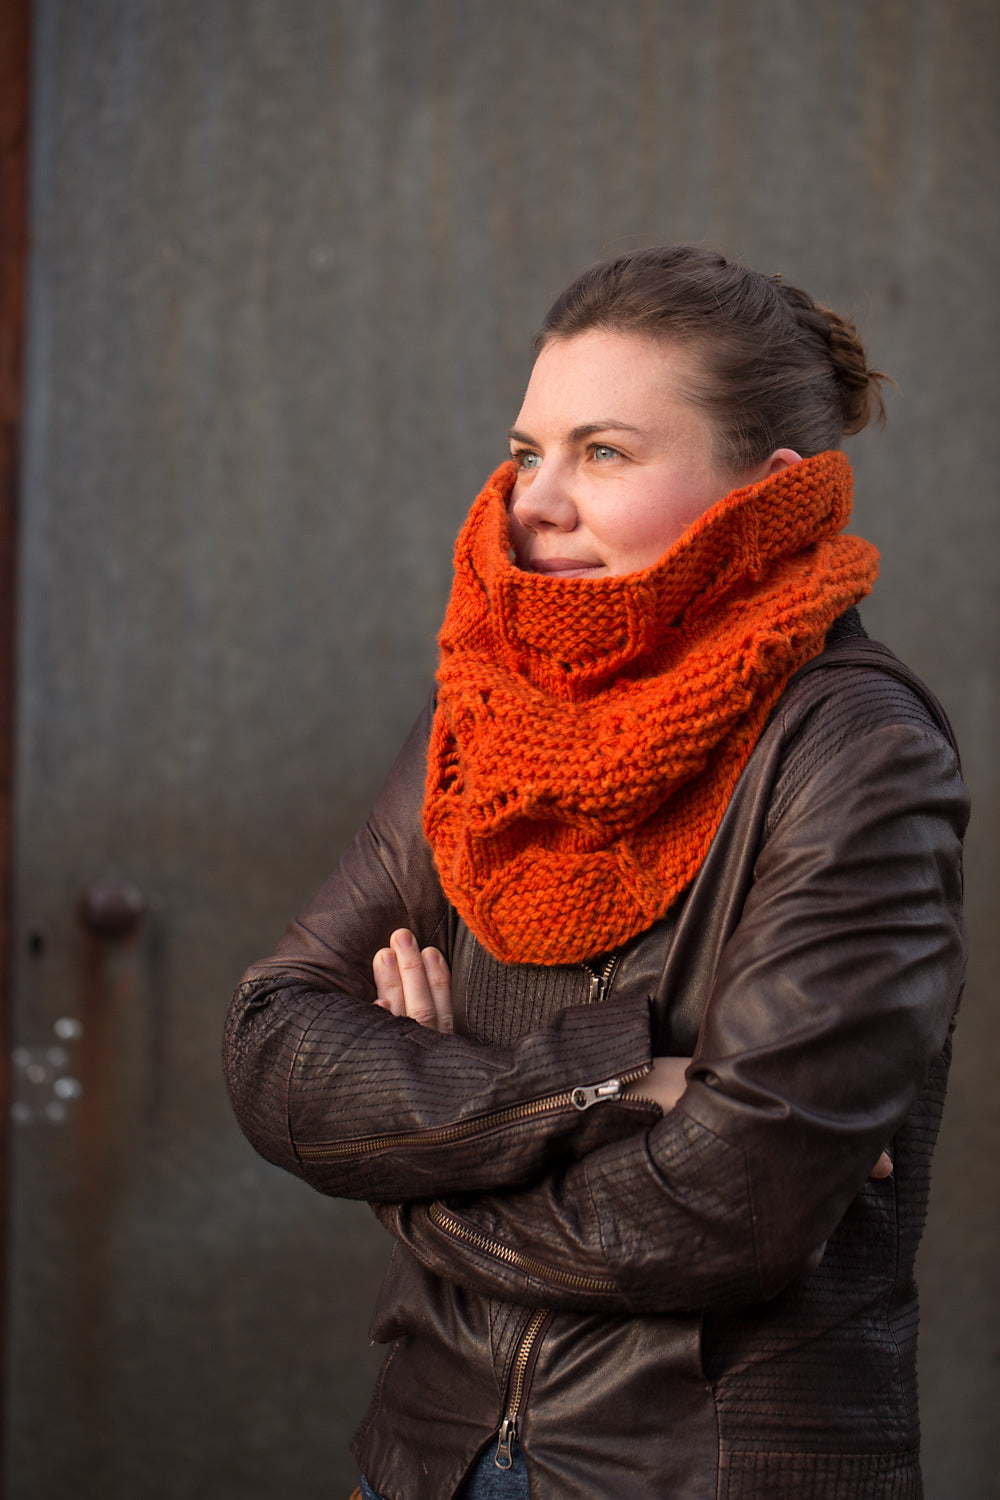 Collar knitting pattern with traditional pattern by Ysolda Teague, Suloinen